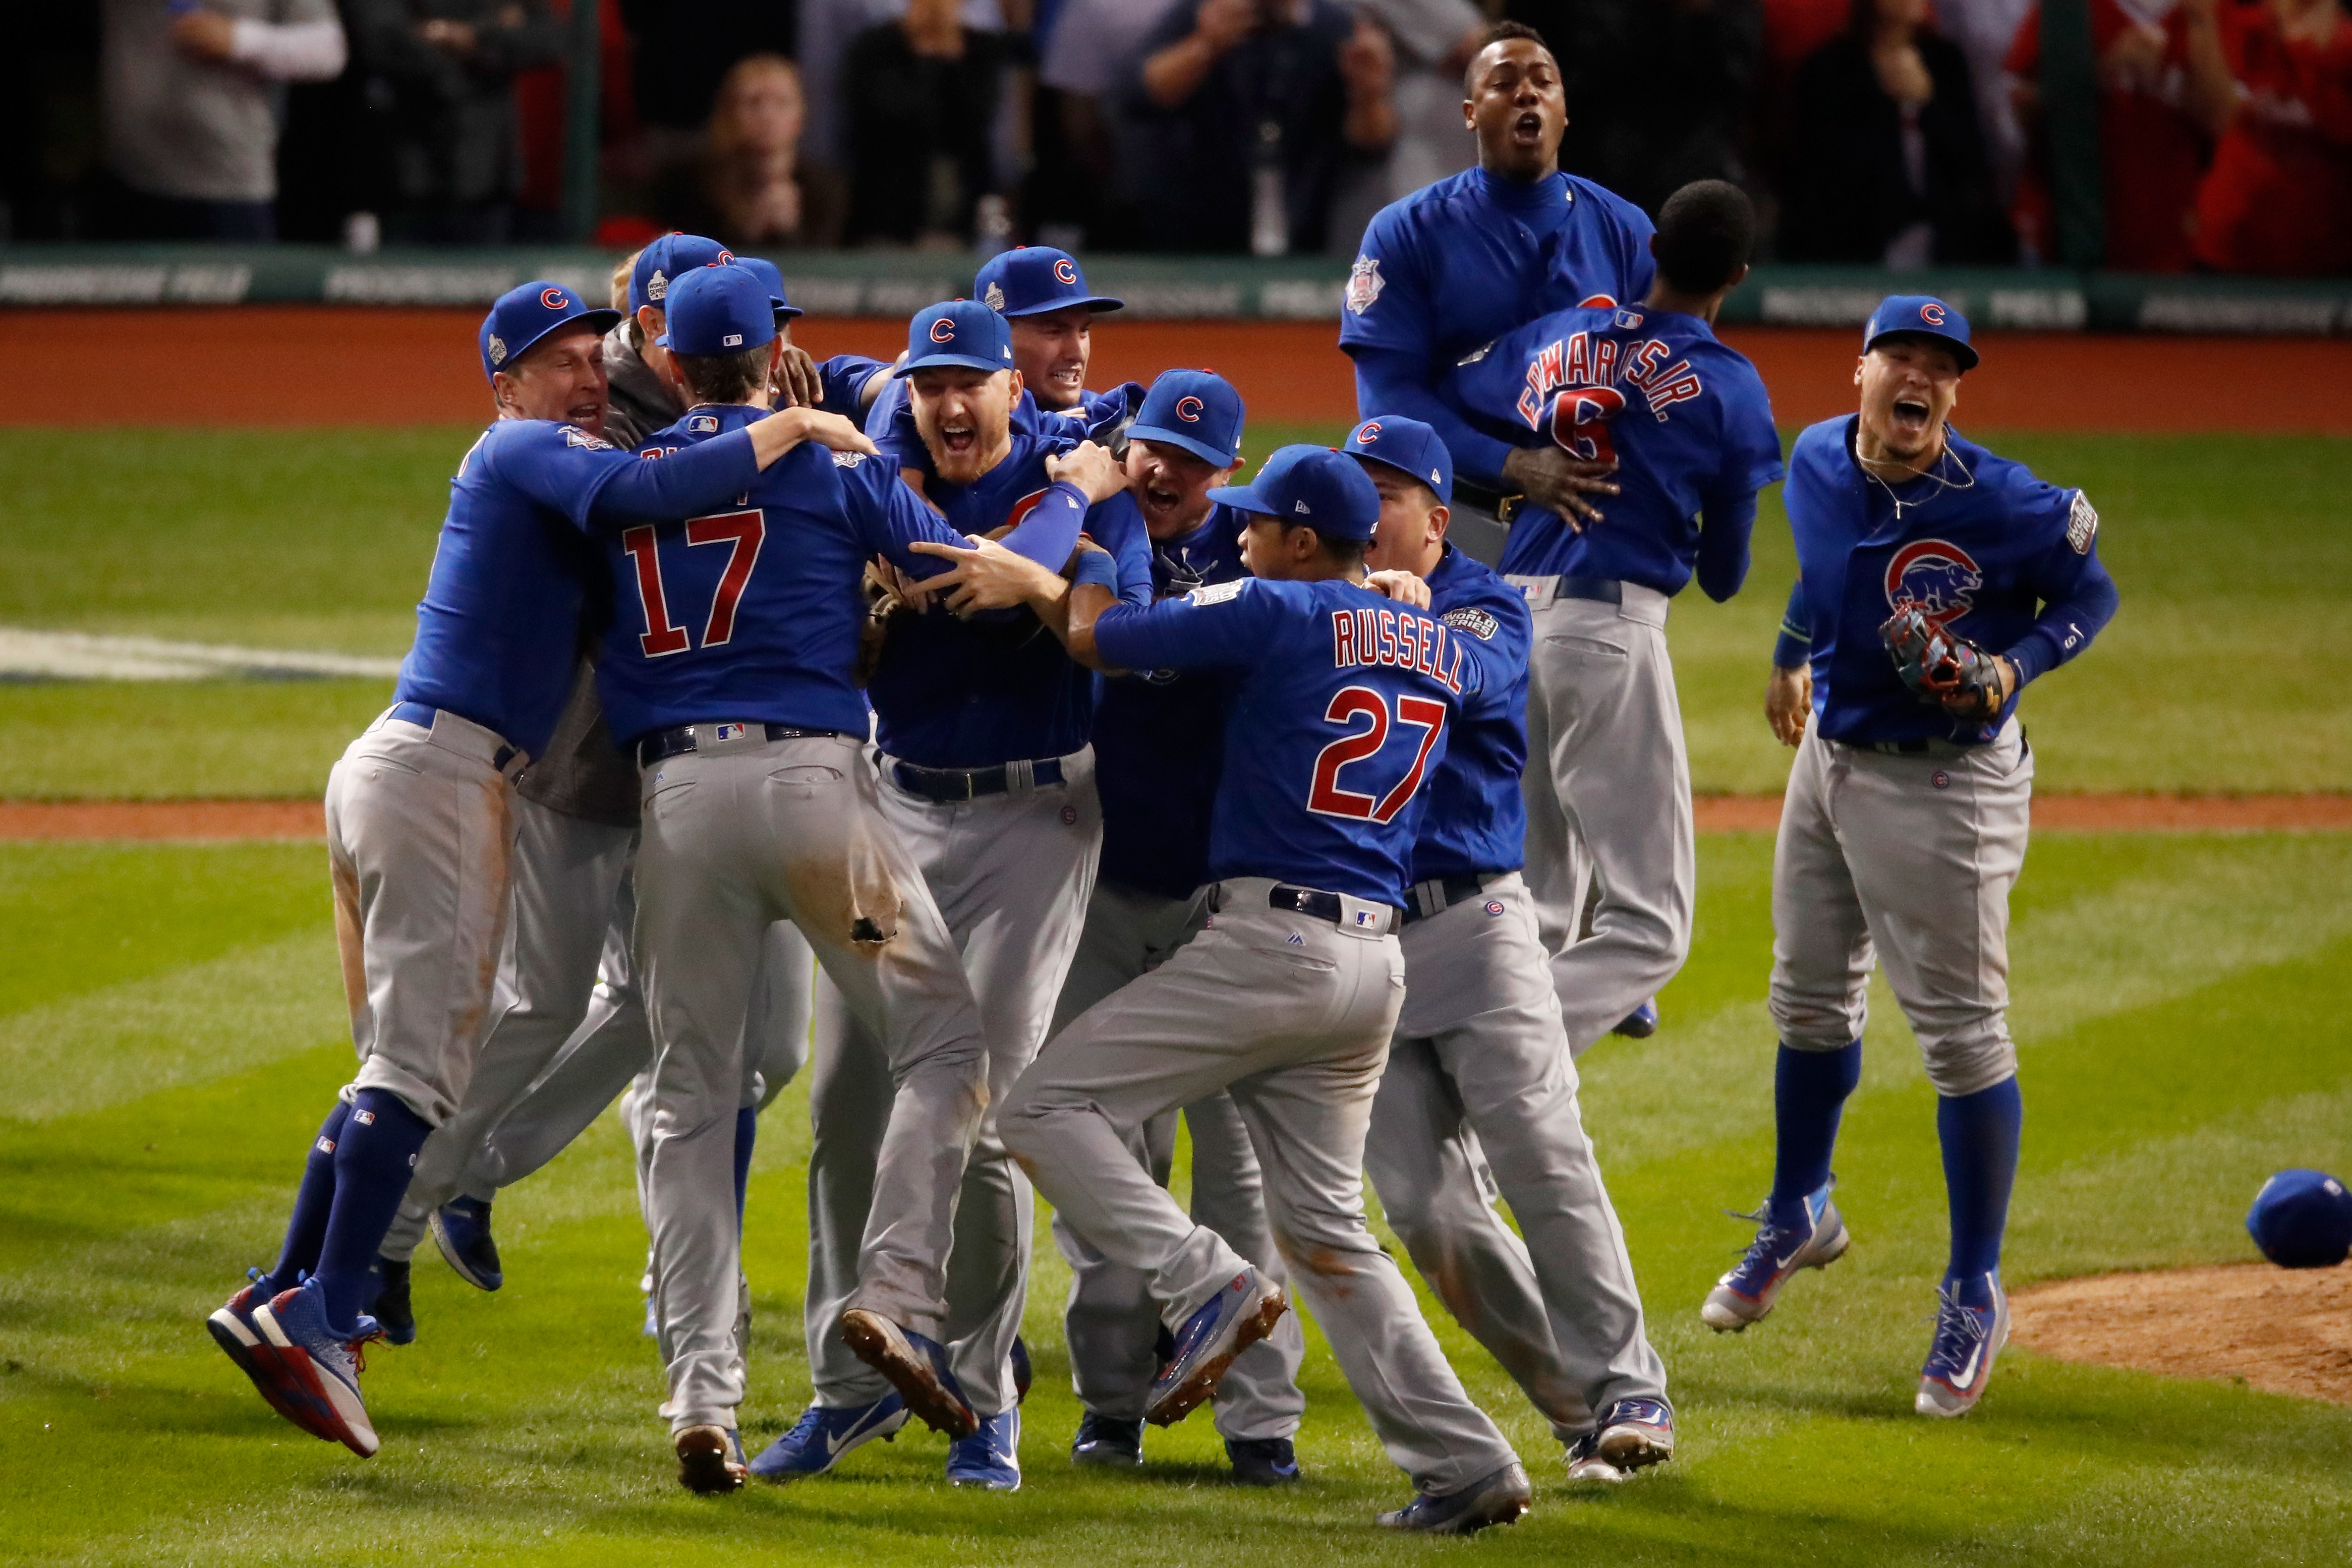 CLEVELAND, OH - NOVEMBER 02: The Chicago Cubs celebrate after defeating the Cleveland Indians 8-7 in Game Seven of the 2016 World Series at Progressive Field on November 2, 2016 in Cleveland, Ohio. The Cubs win their first World Series in 108 years.   Gregory Shamus/Getty Images/AFP